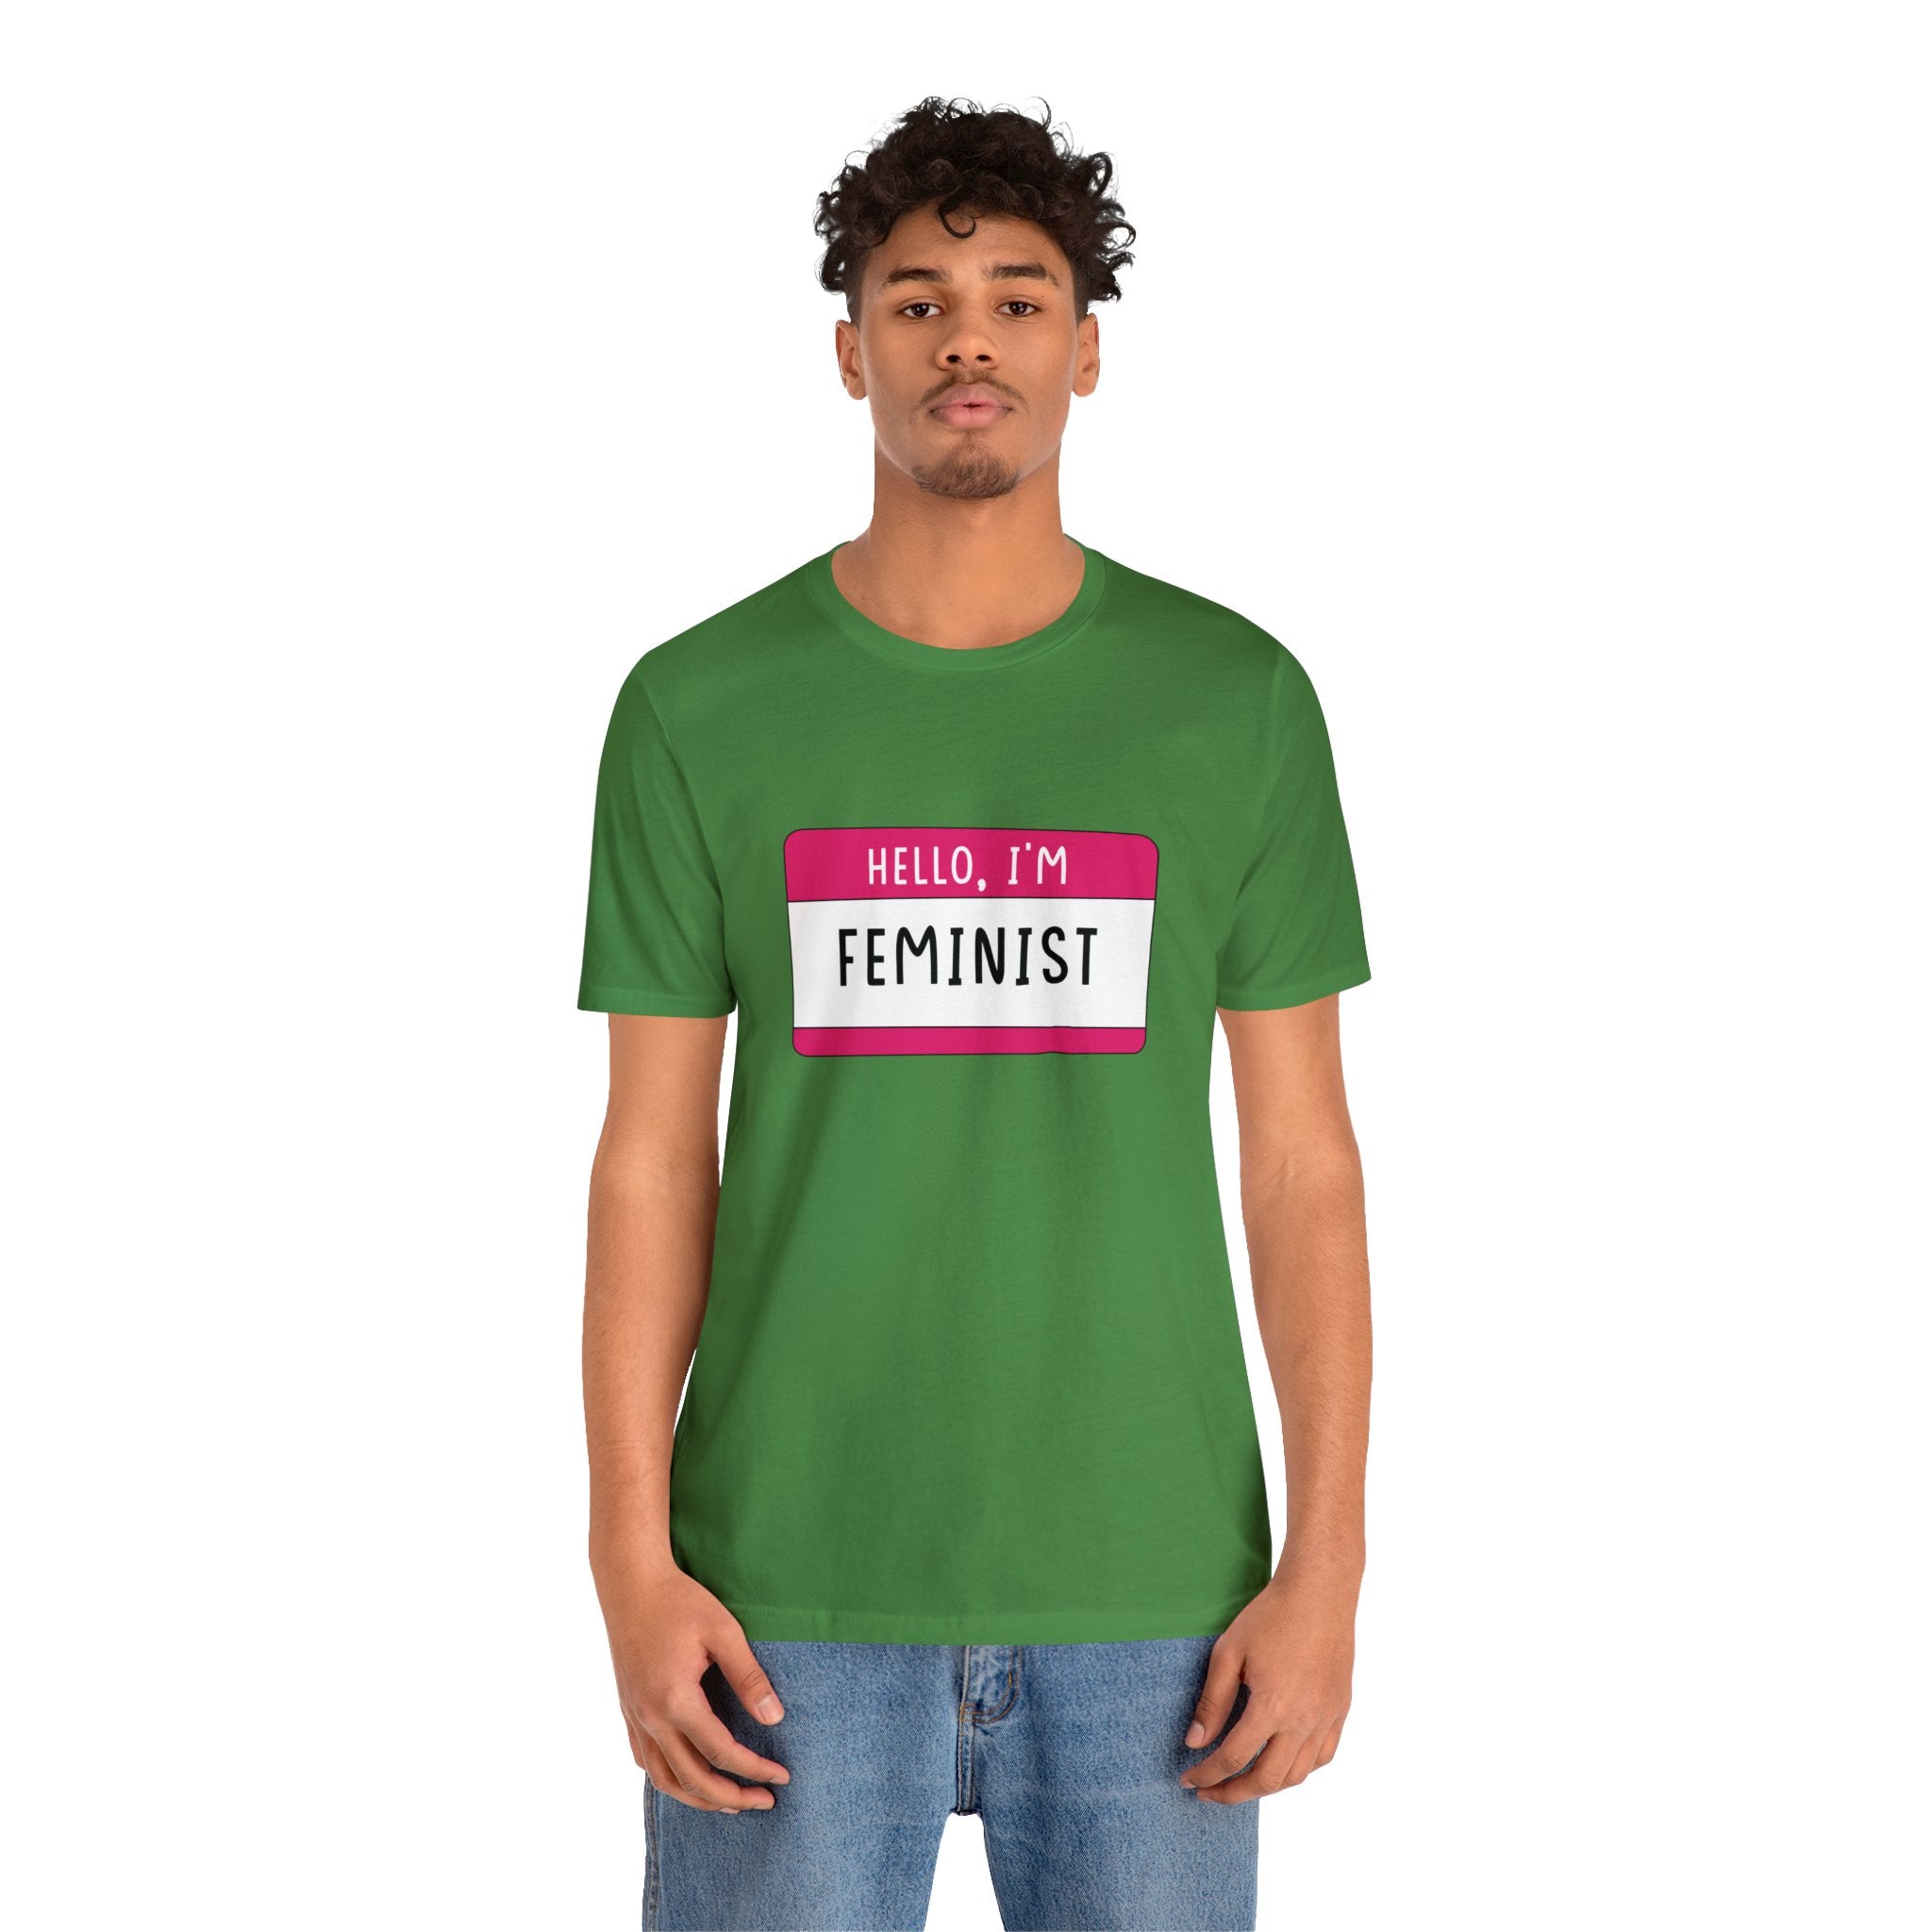 Young man wearing a green Hello, I'm Feminist T-Shirt with a "hello, I'm feminist" badge design, standing against a white background.